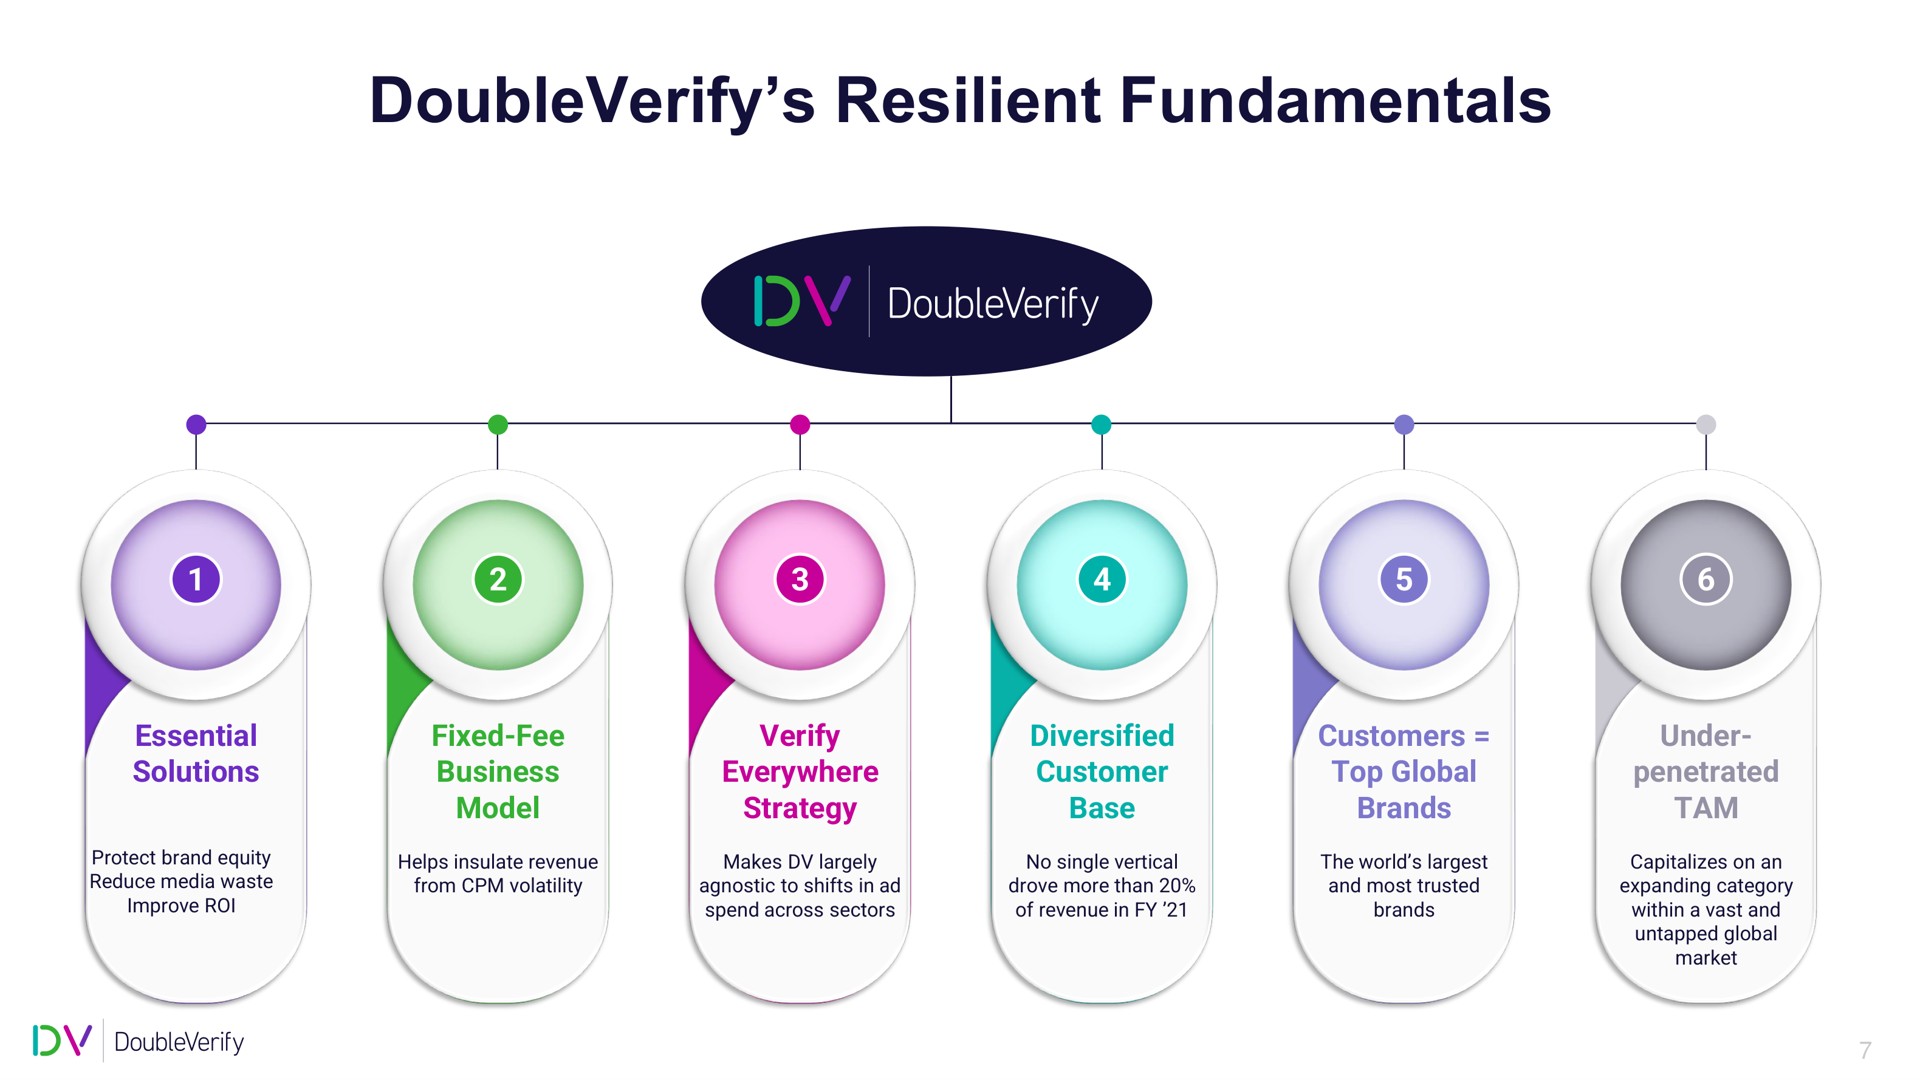 resilient fundamentals | DoubleVerify